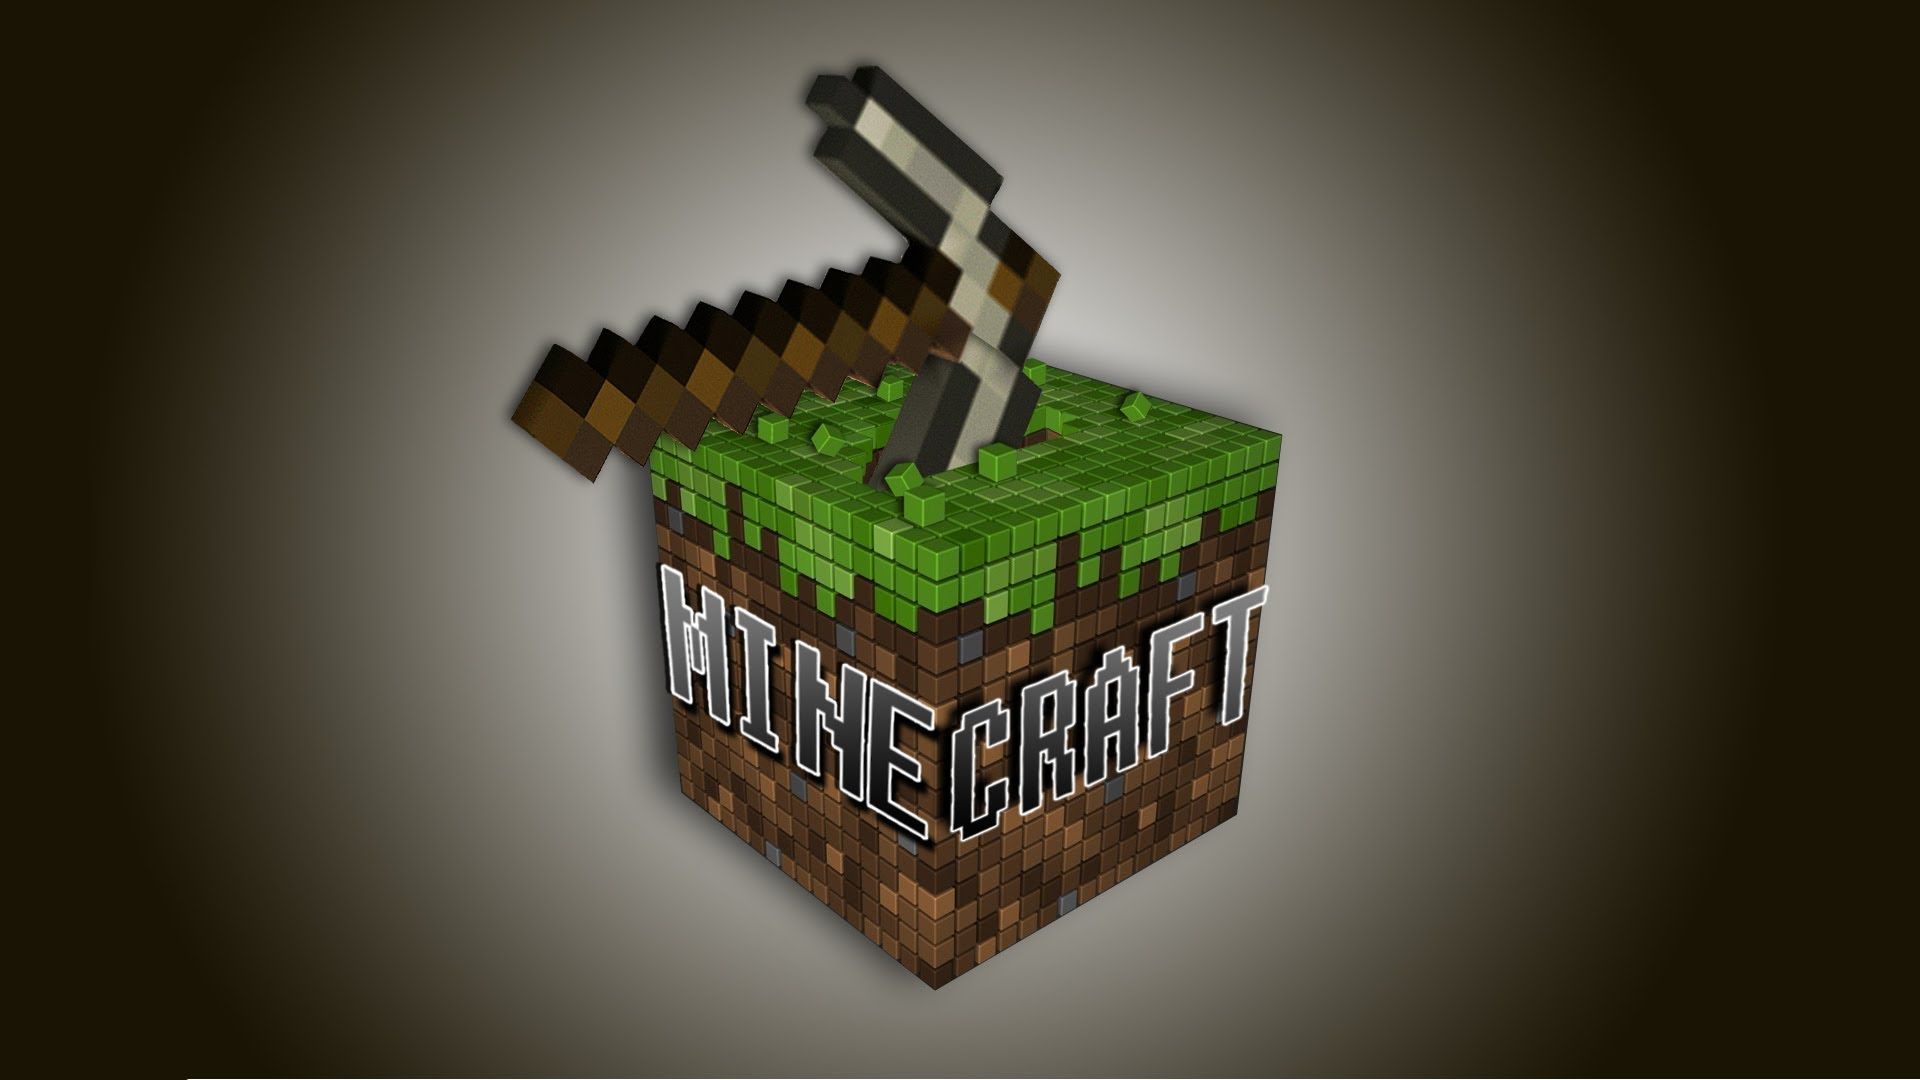 minecraft logo wallpapers Wallpapers